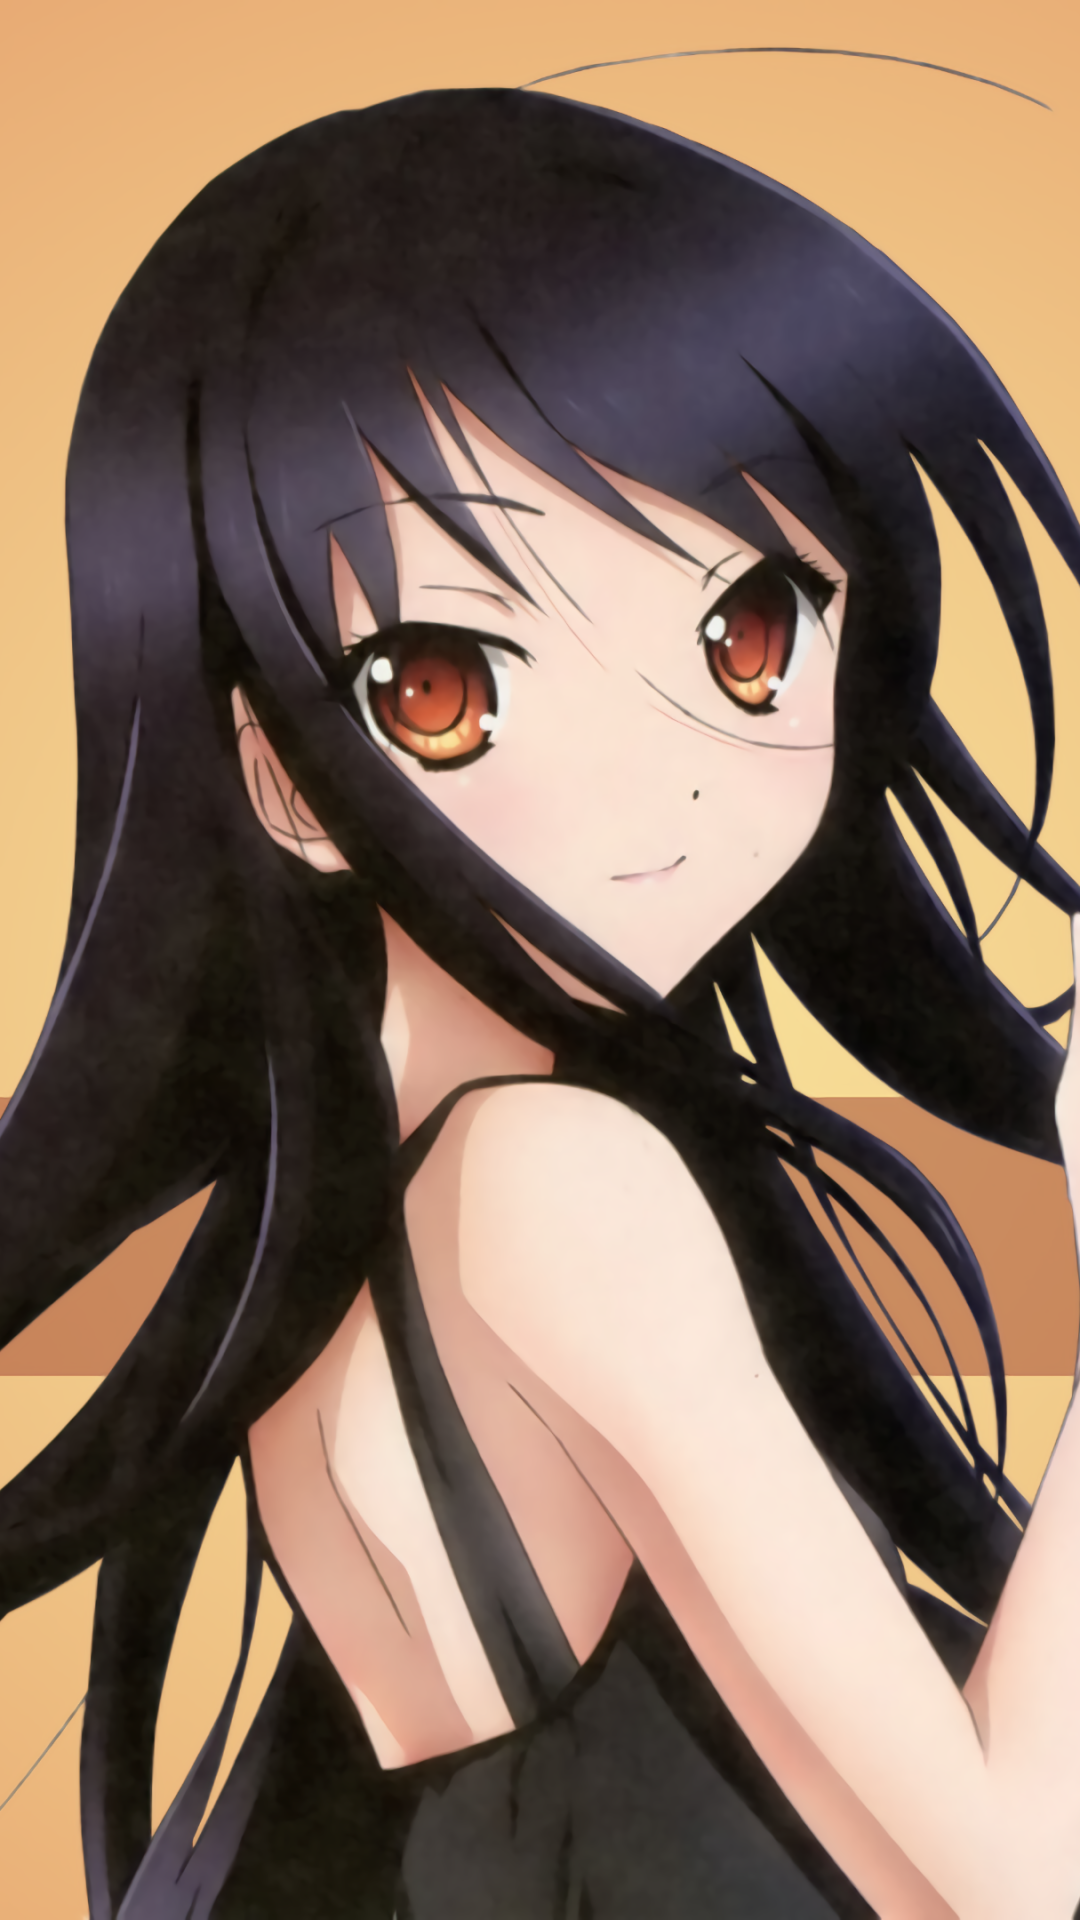 Accel World Phone Wallpaper by spectralfire234